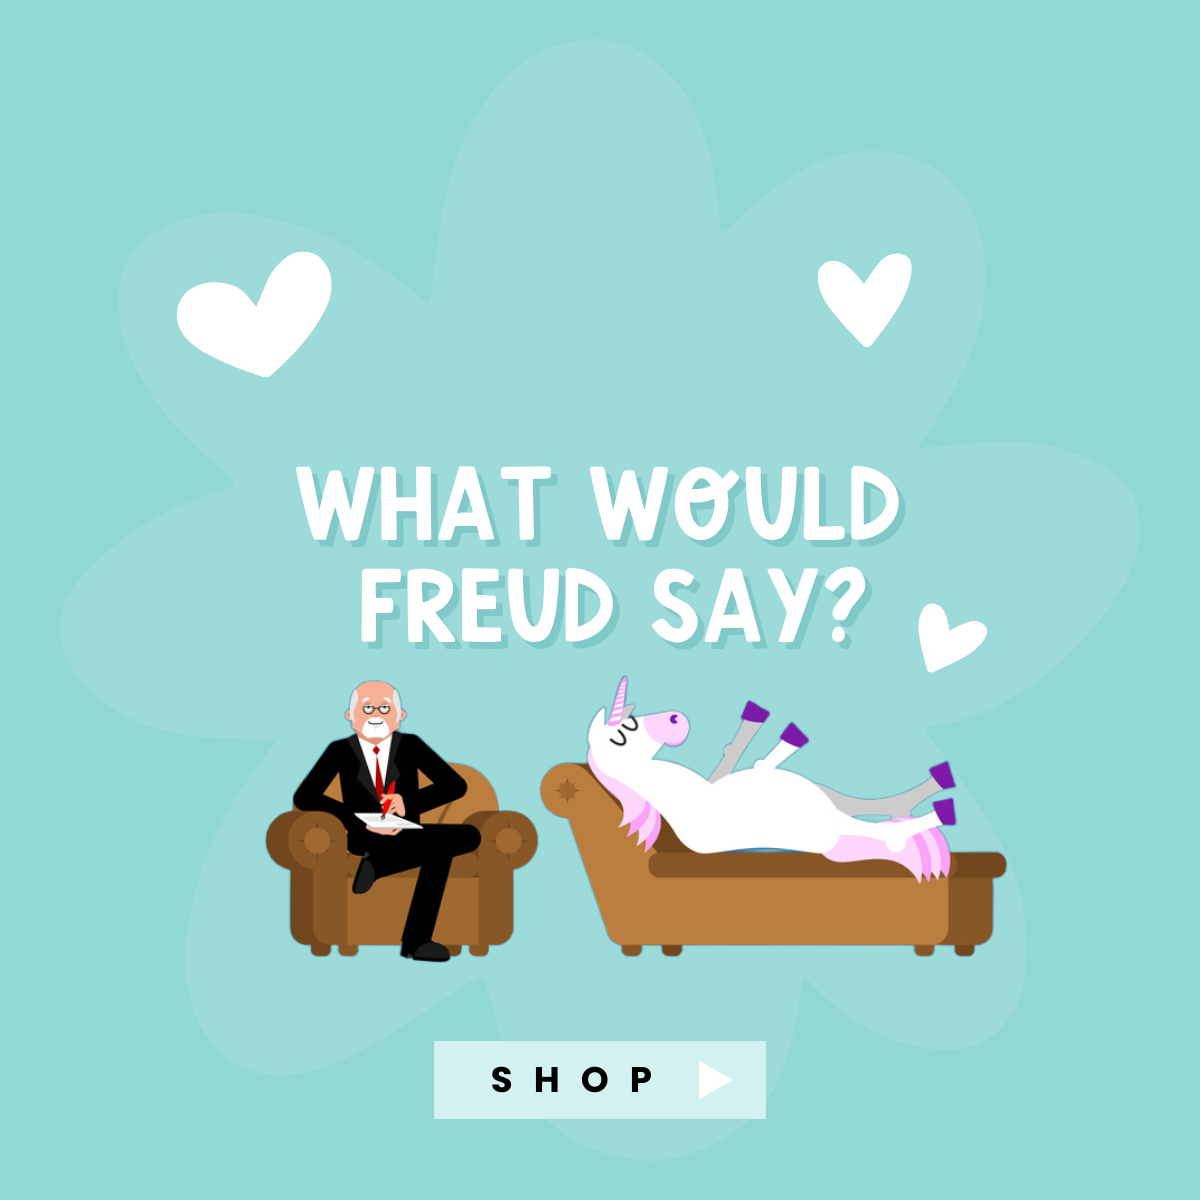 What Would Freud Say?